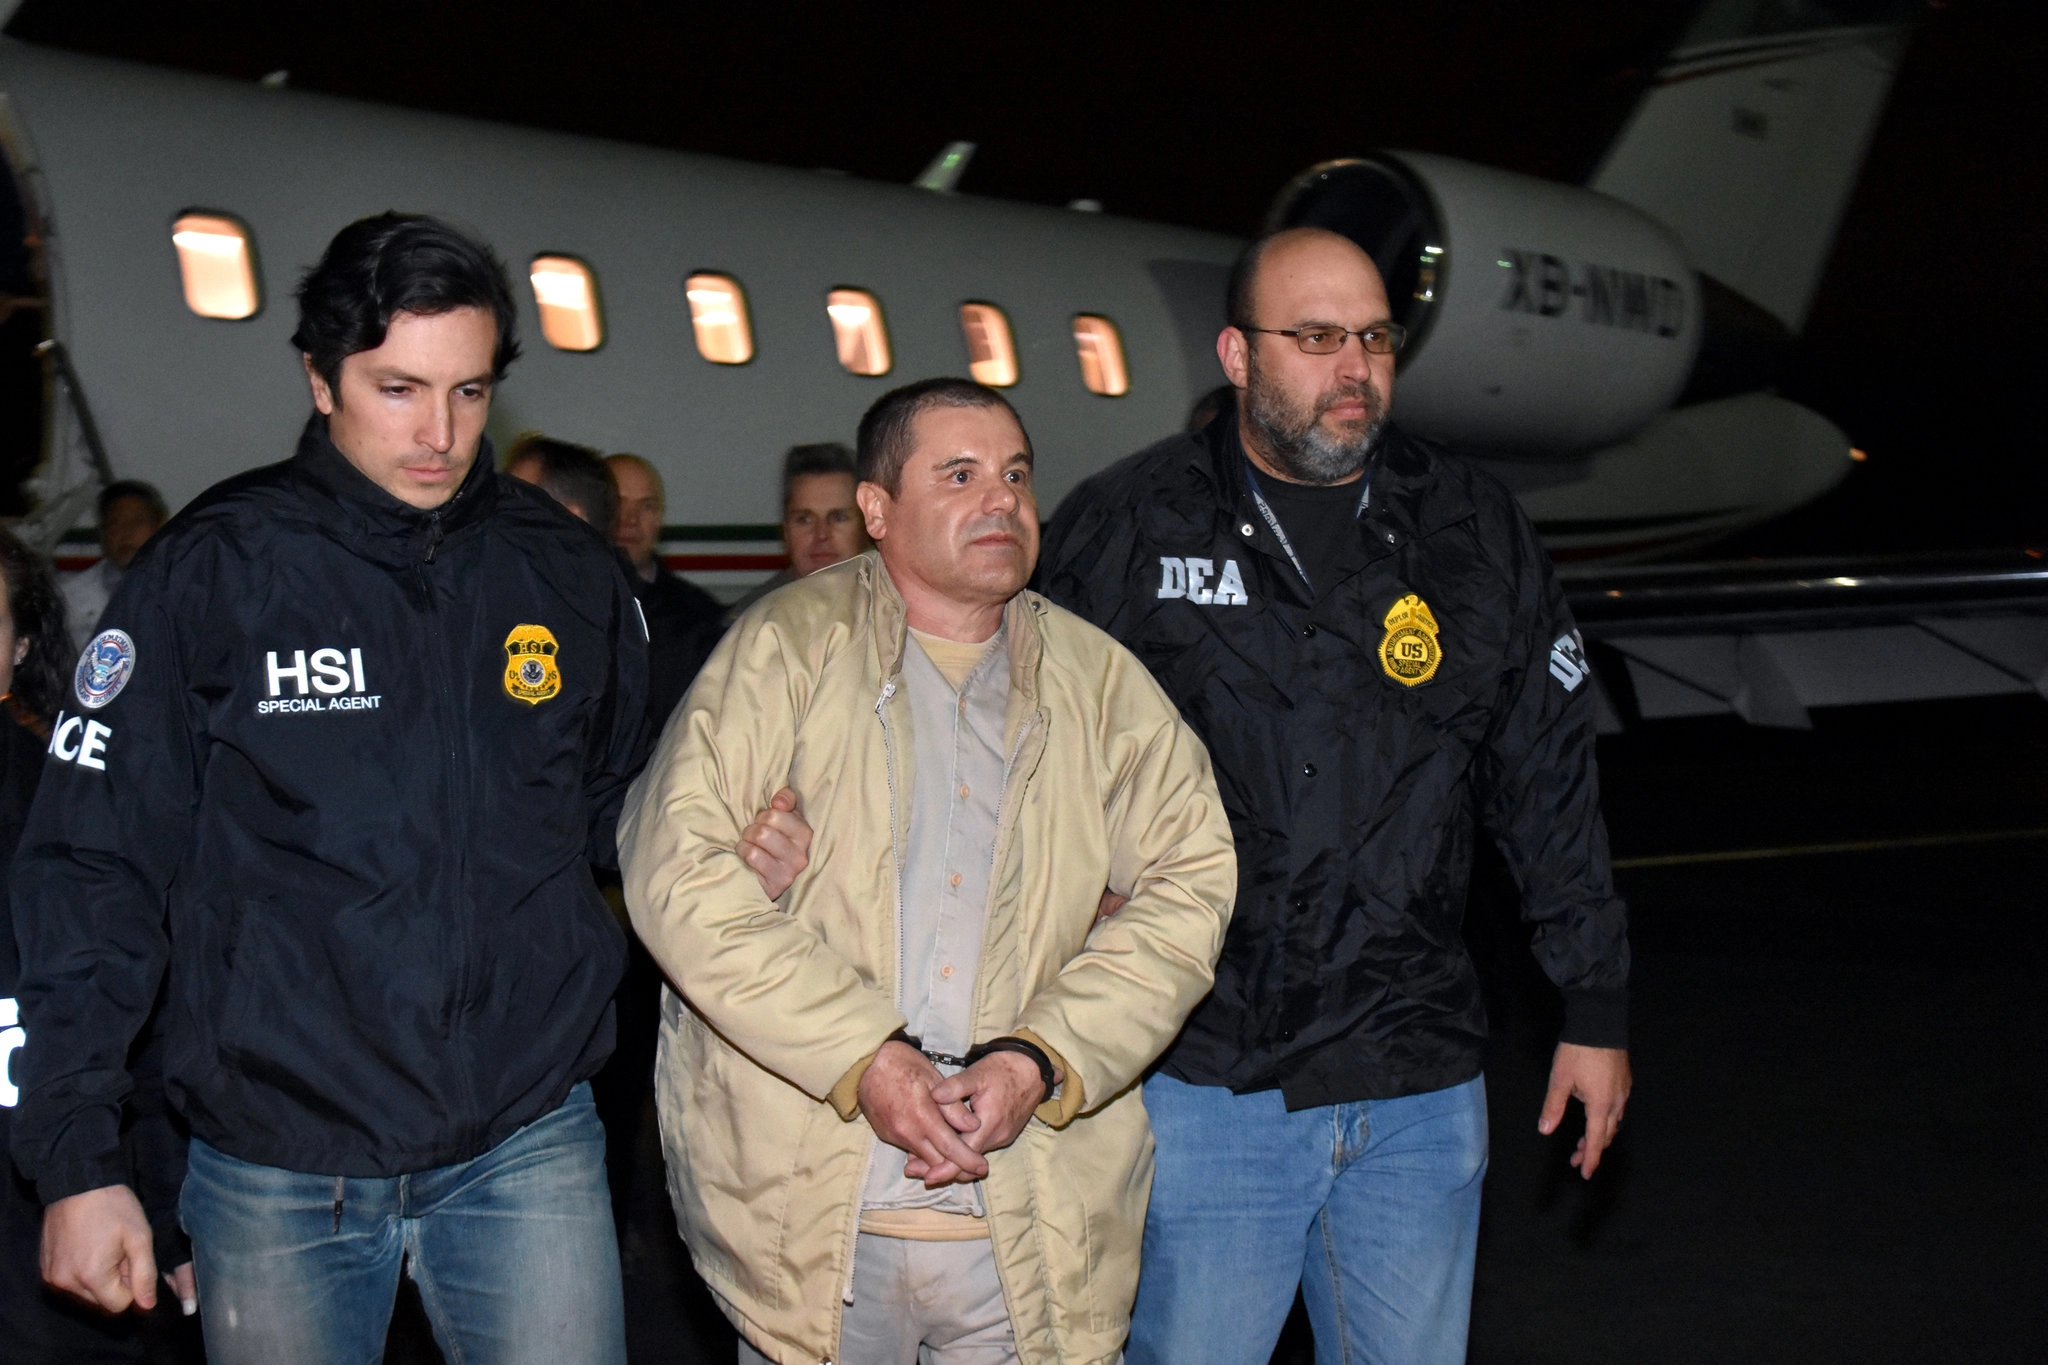 Arrest, Extradition, and Trial of El Chapo